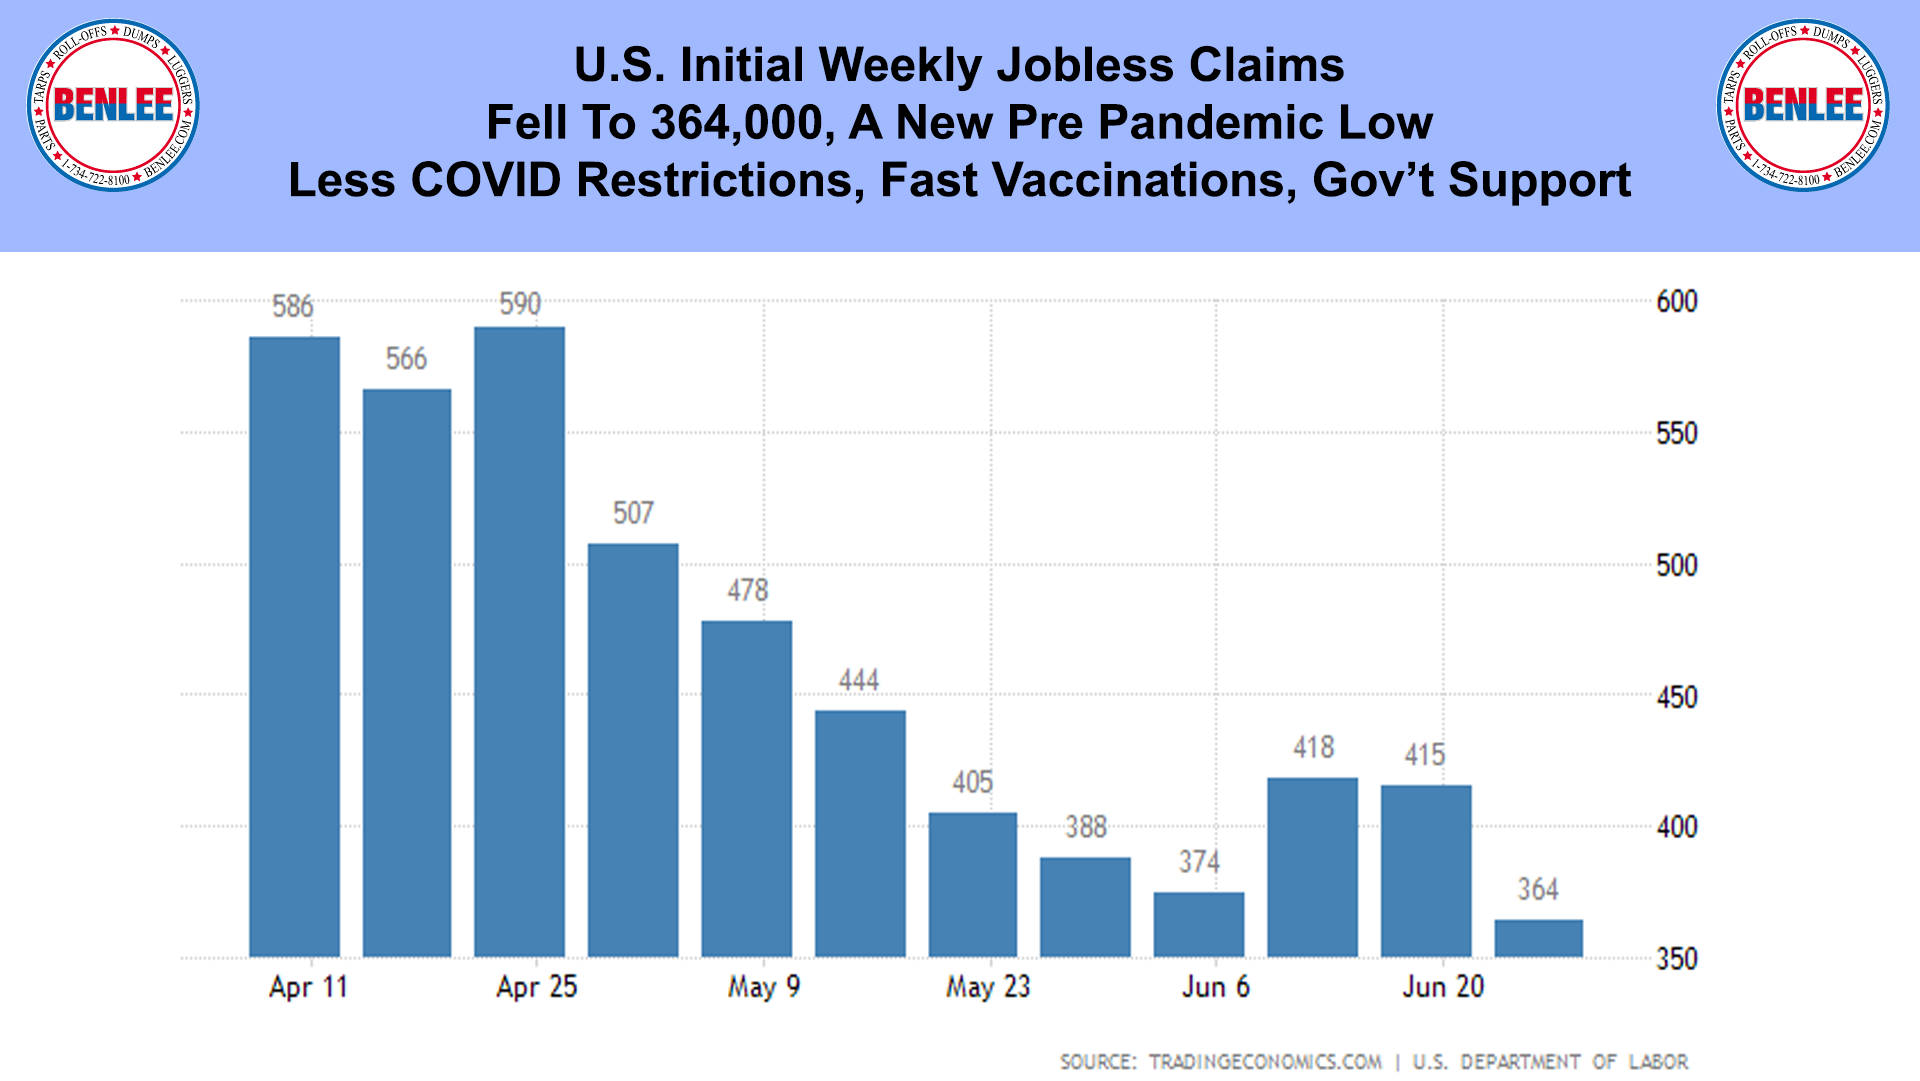 U.S. Initial Weekly Jobless Claims